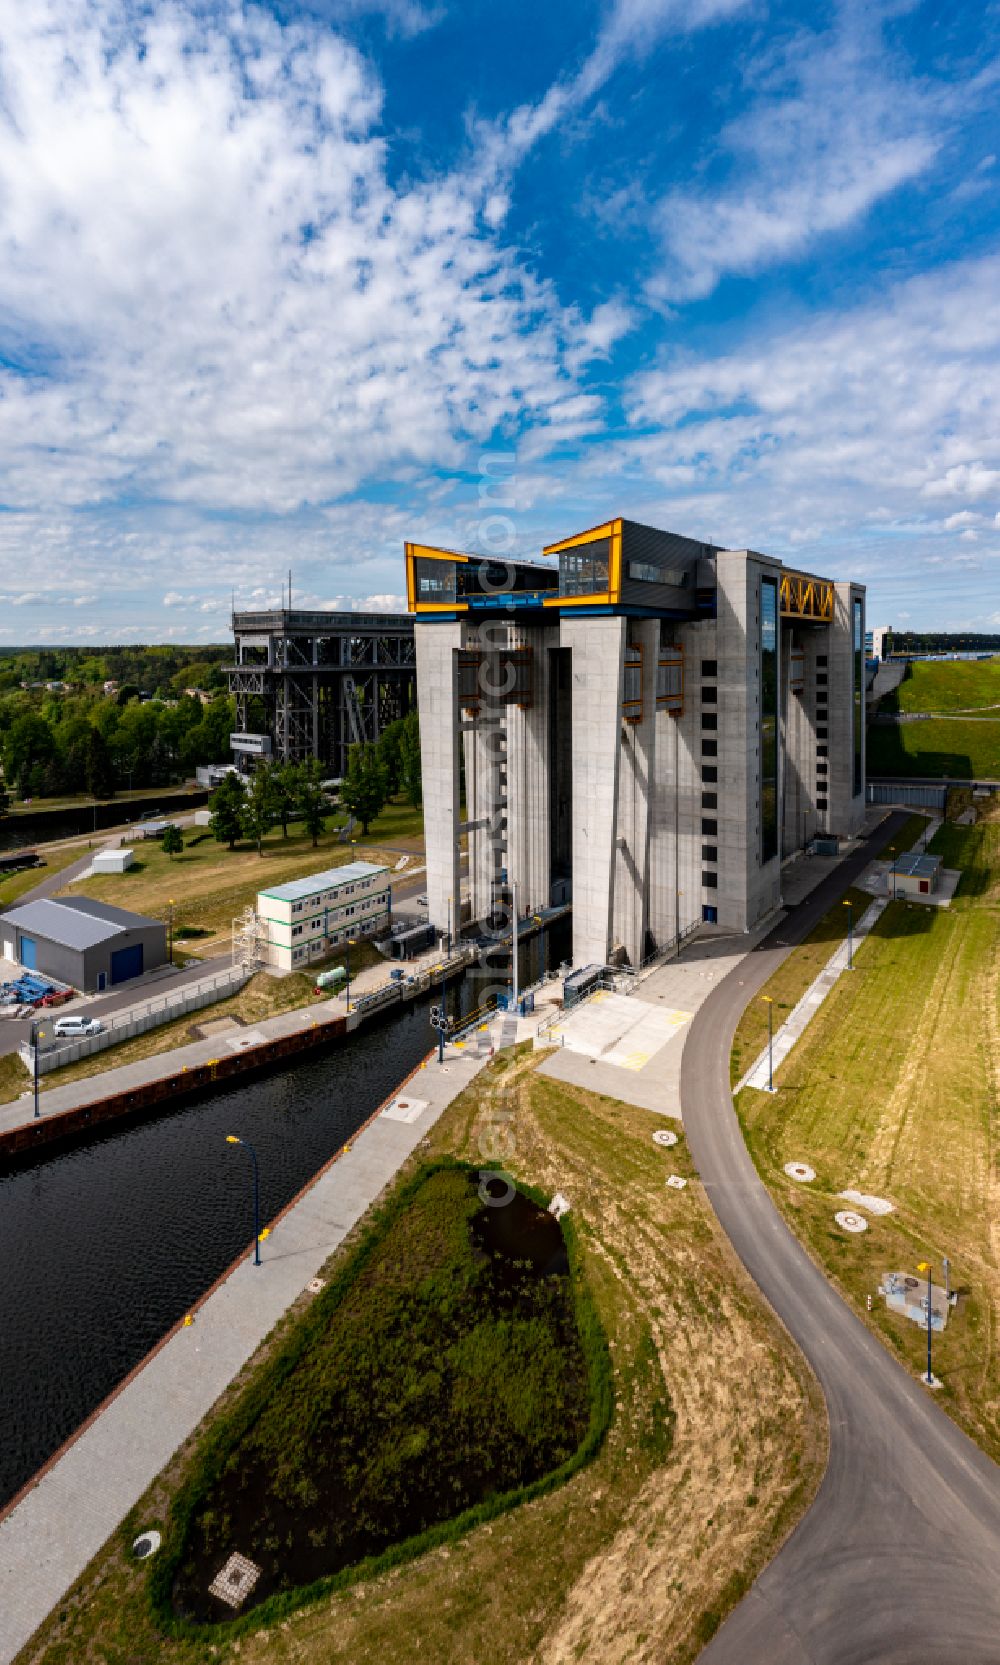 Aerial image Niederfinow - New and old Niederfinow ship lift on the Finow Canal in the state of Brandenburg